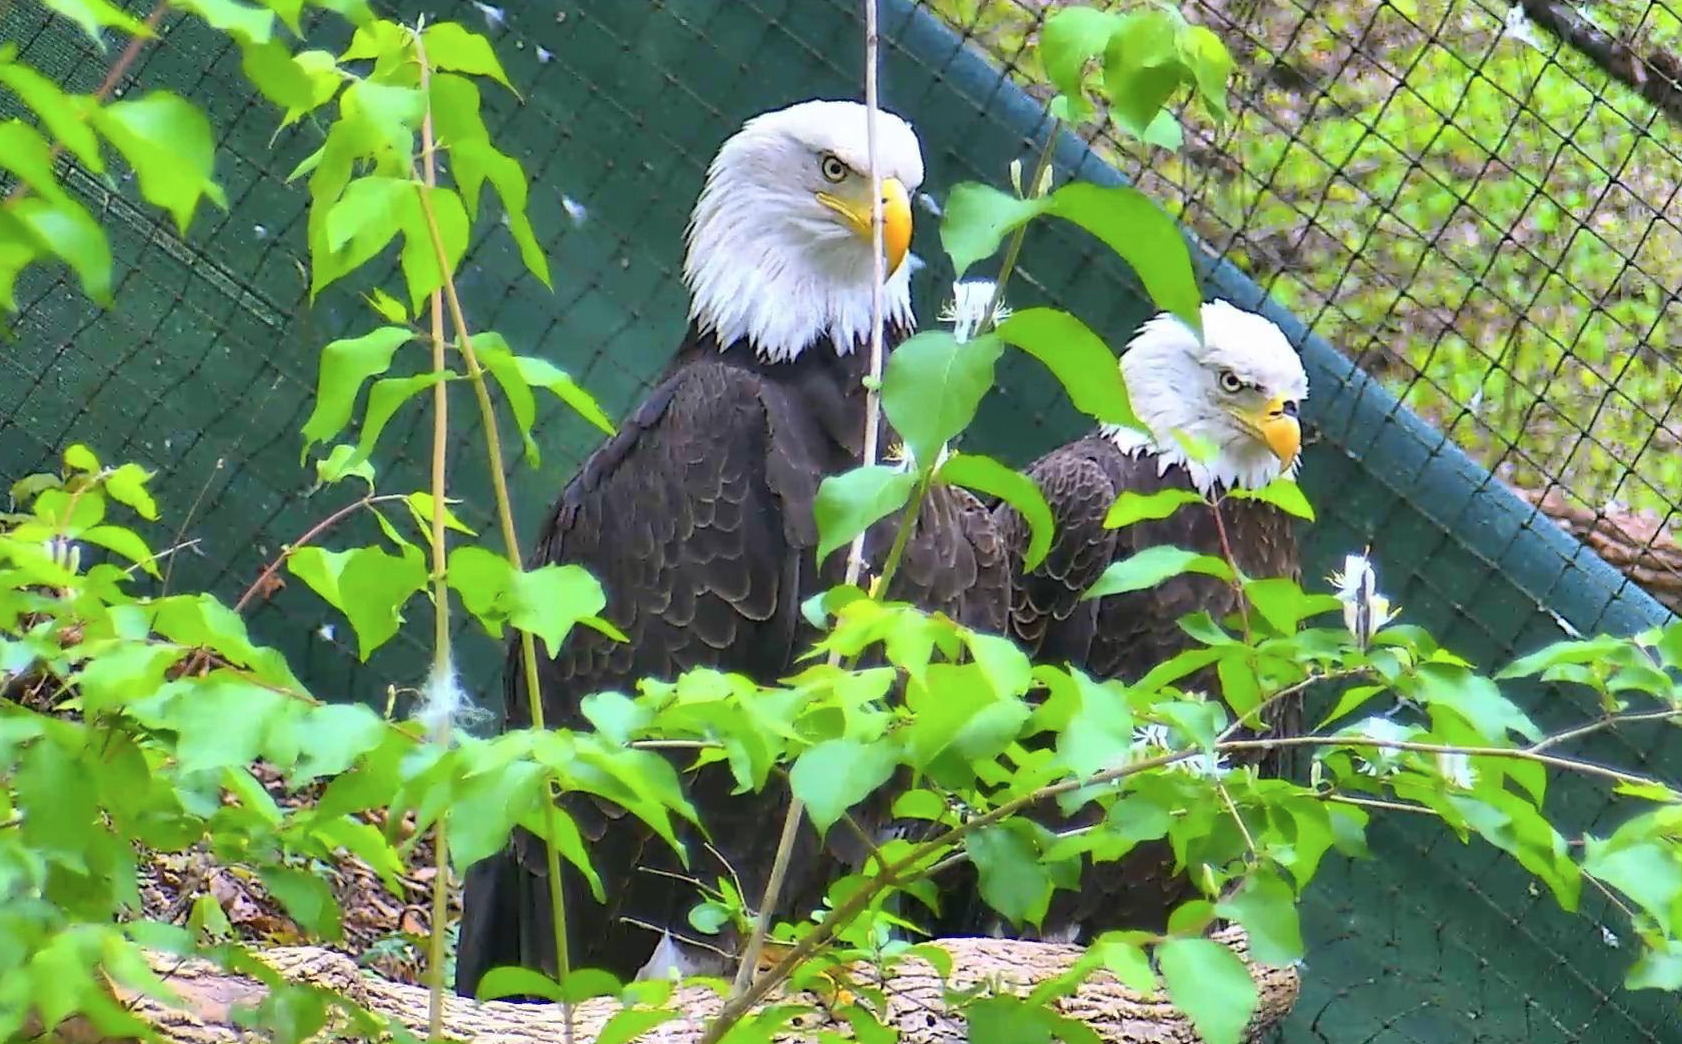 Glenda and Grant bonded in the Pick-A-Mate section and were then given their own private compartment in the aviary. Photo taken April 22, 2018.